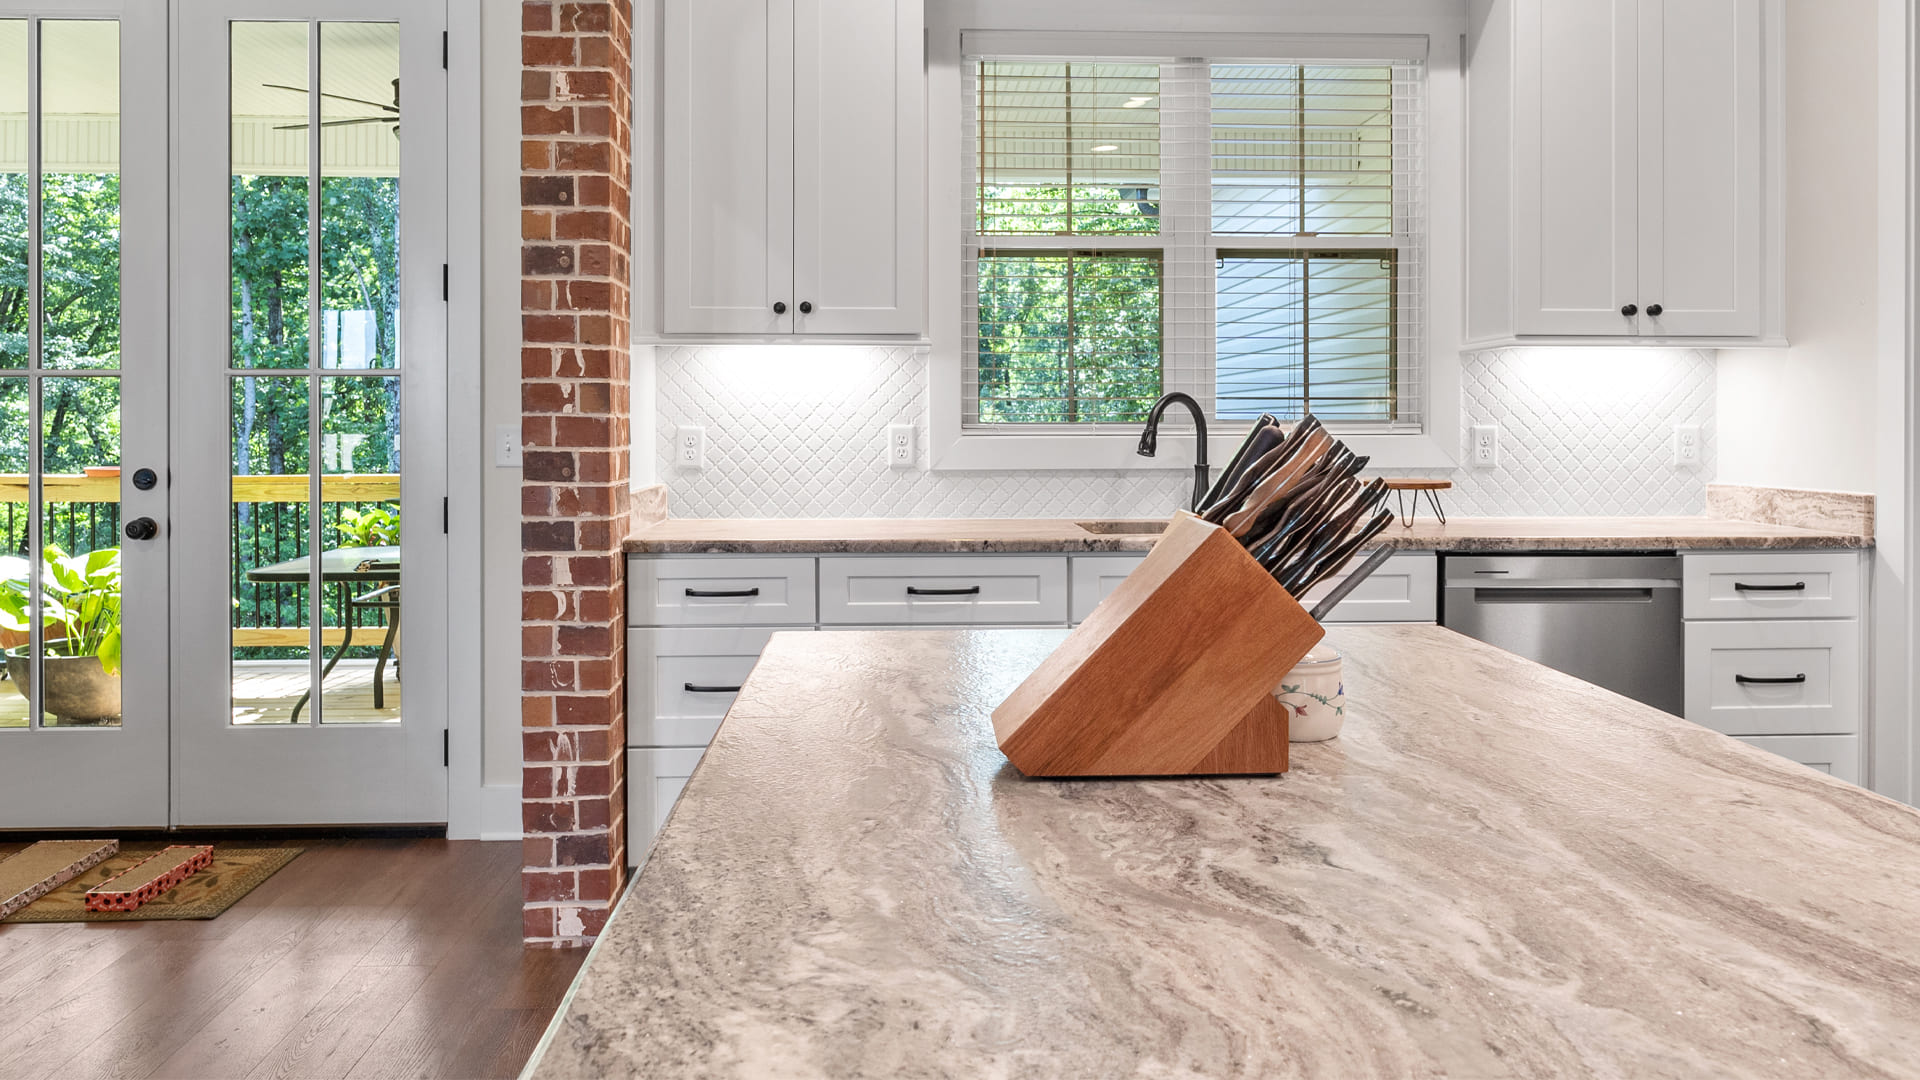 Inviting remodeled kitchen with white shaker cabinets and a large kitchen island with a marbled taupe countertop